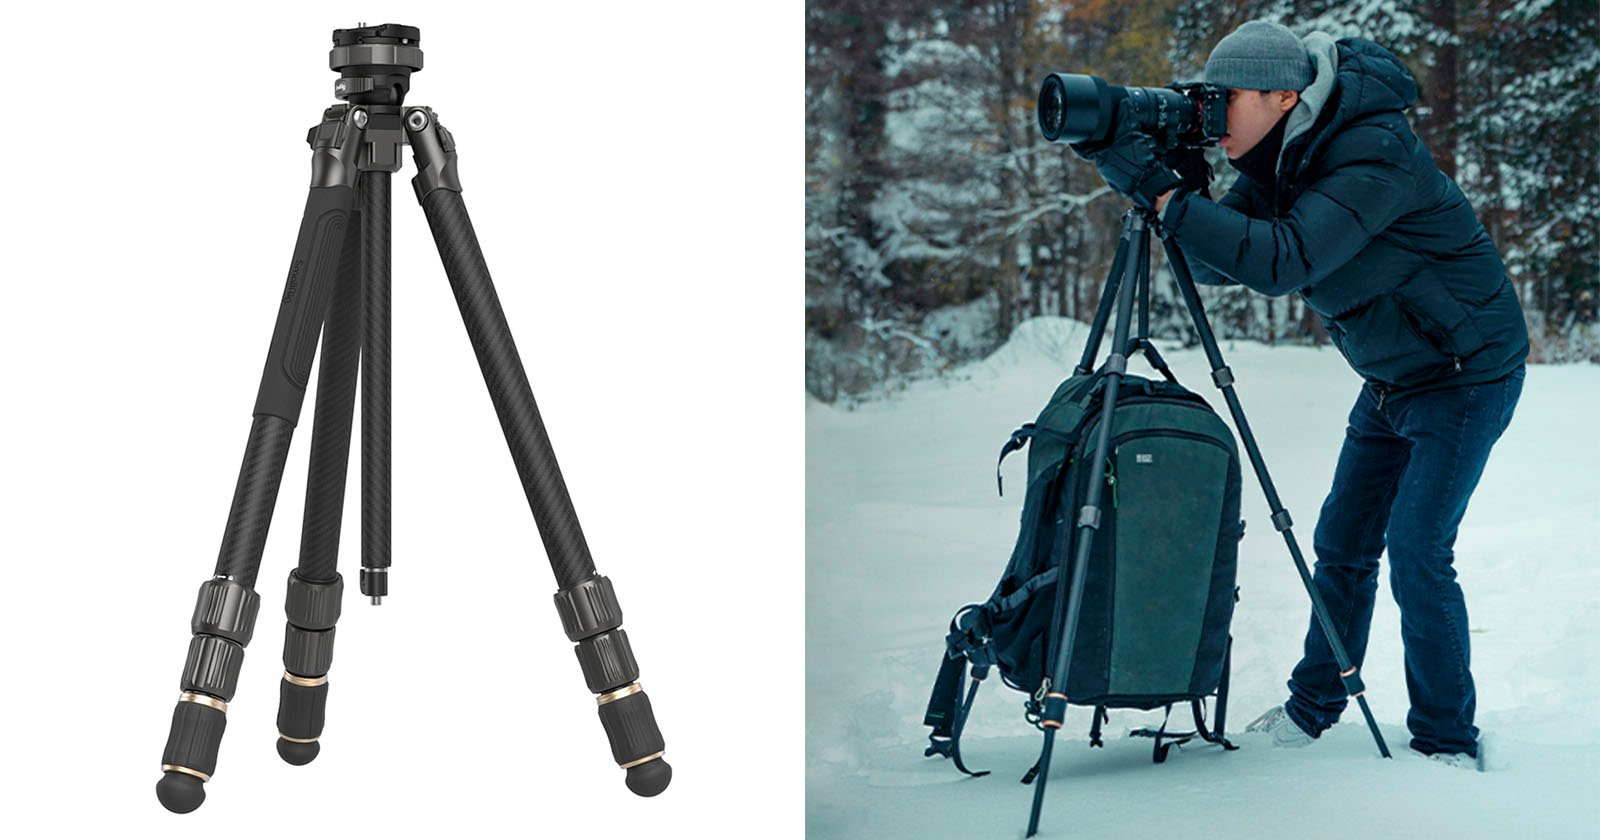 SmallRig’s New $240 Carbon Fiber Tripod is for Traveling Photographers